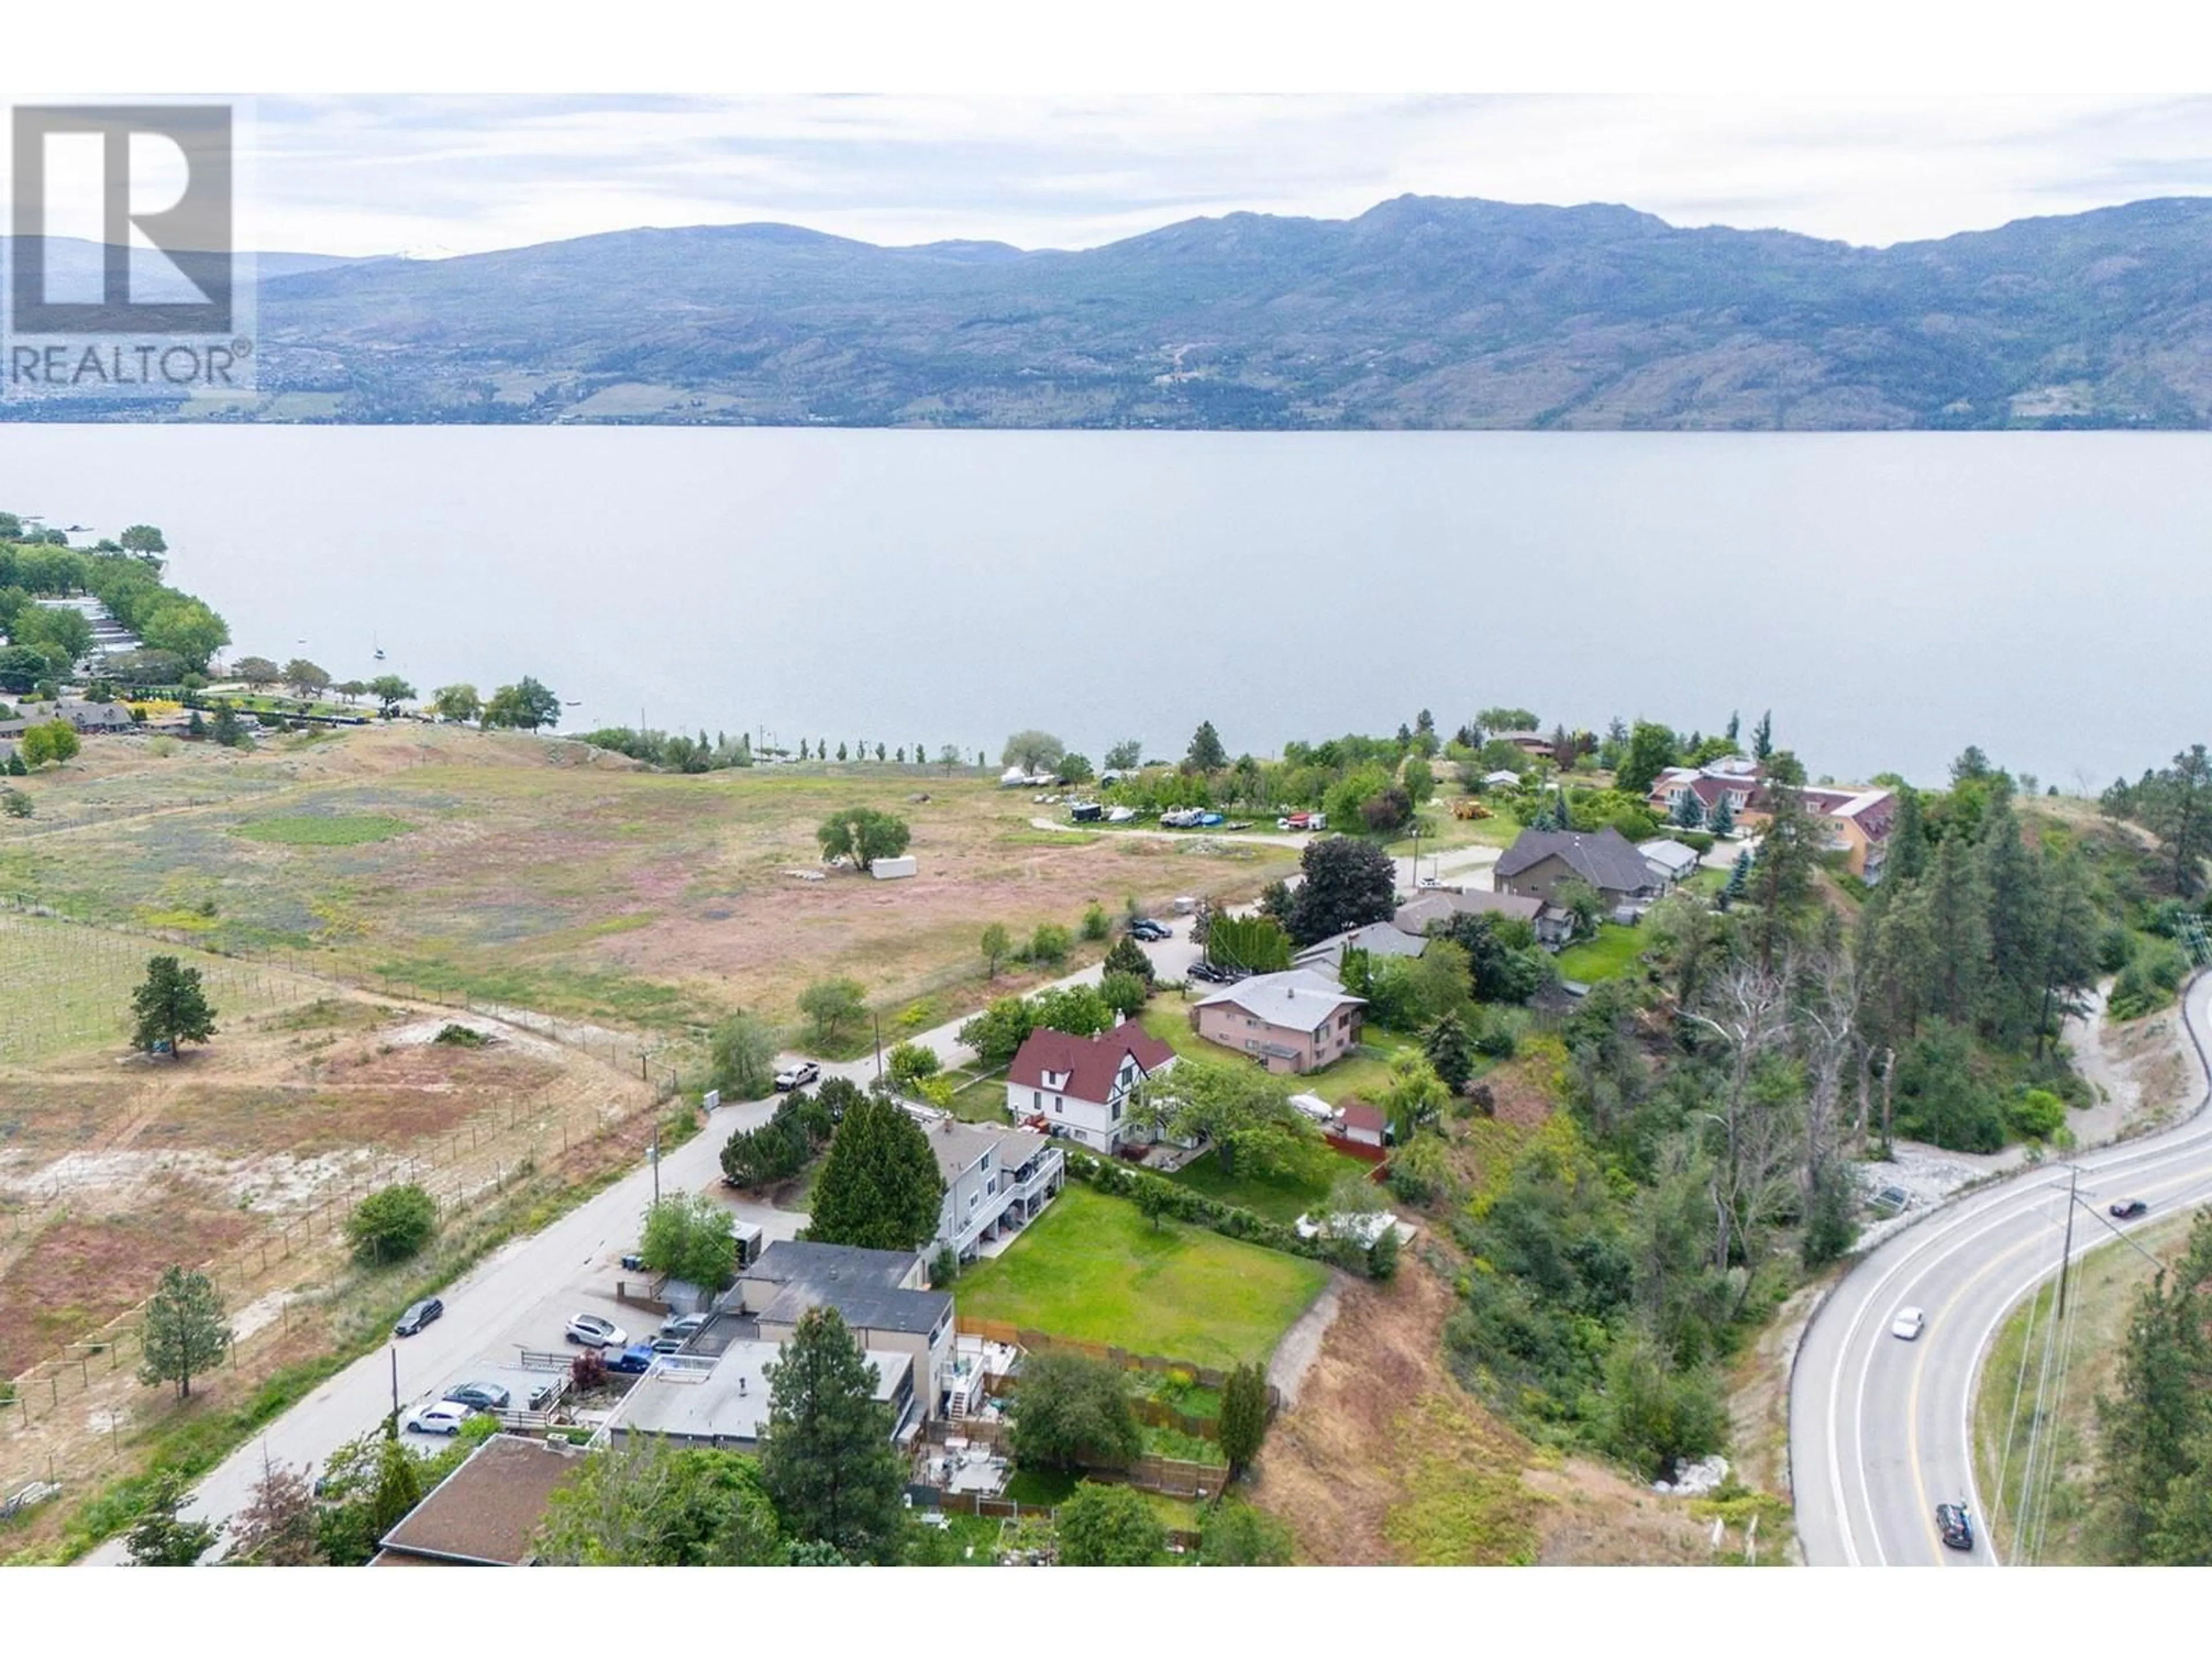 Lakeview for 3766 Wetton Road, West Kelowna British Columbia V4T2C1